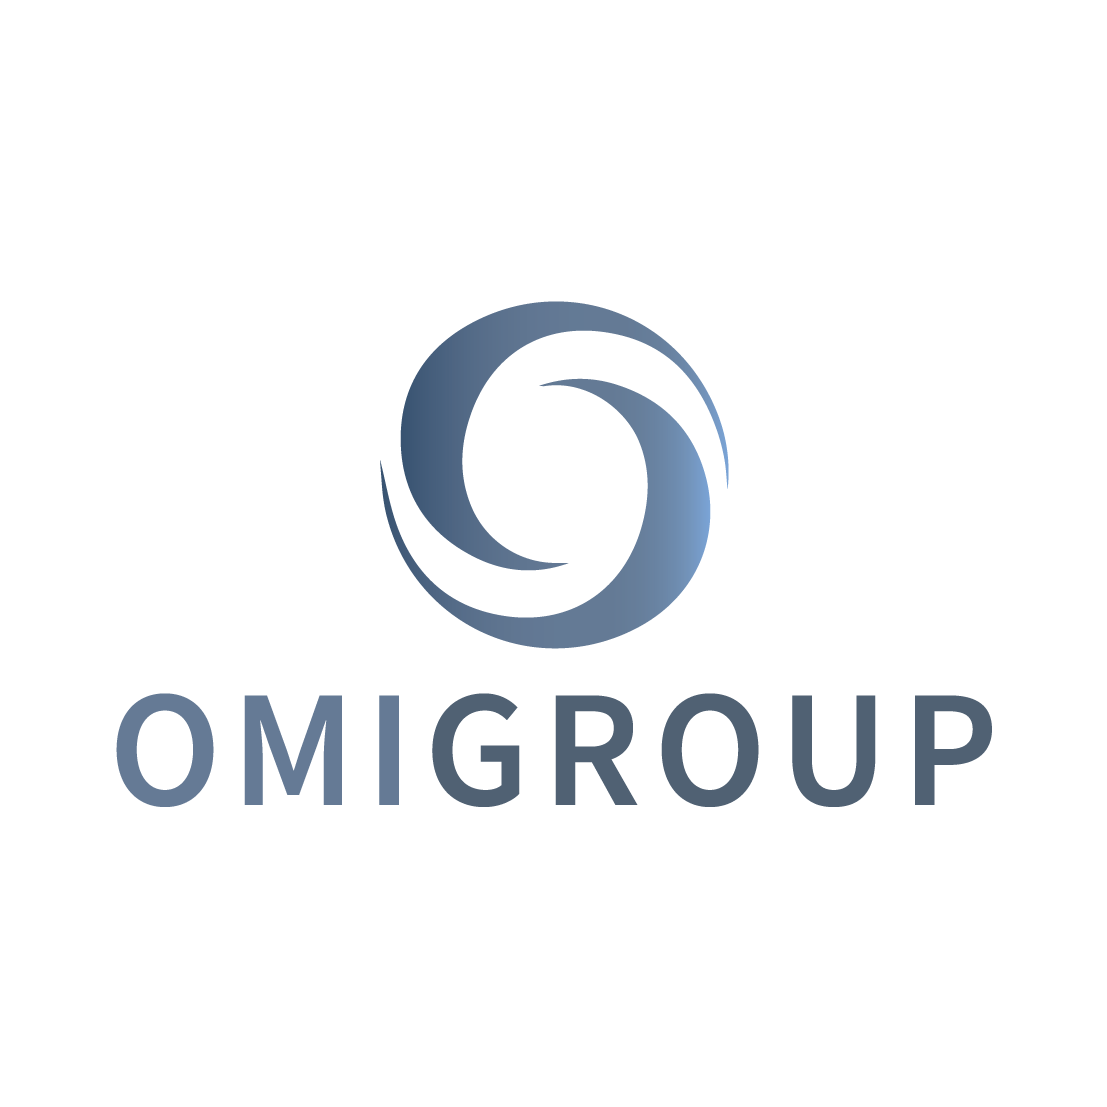 OMIGROUP